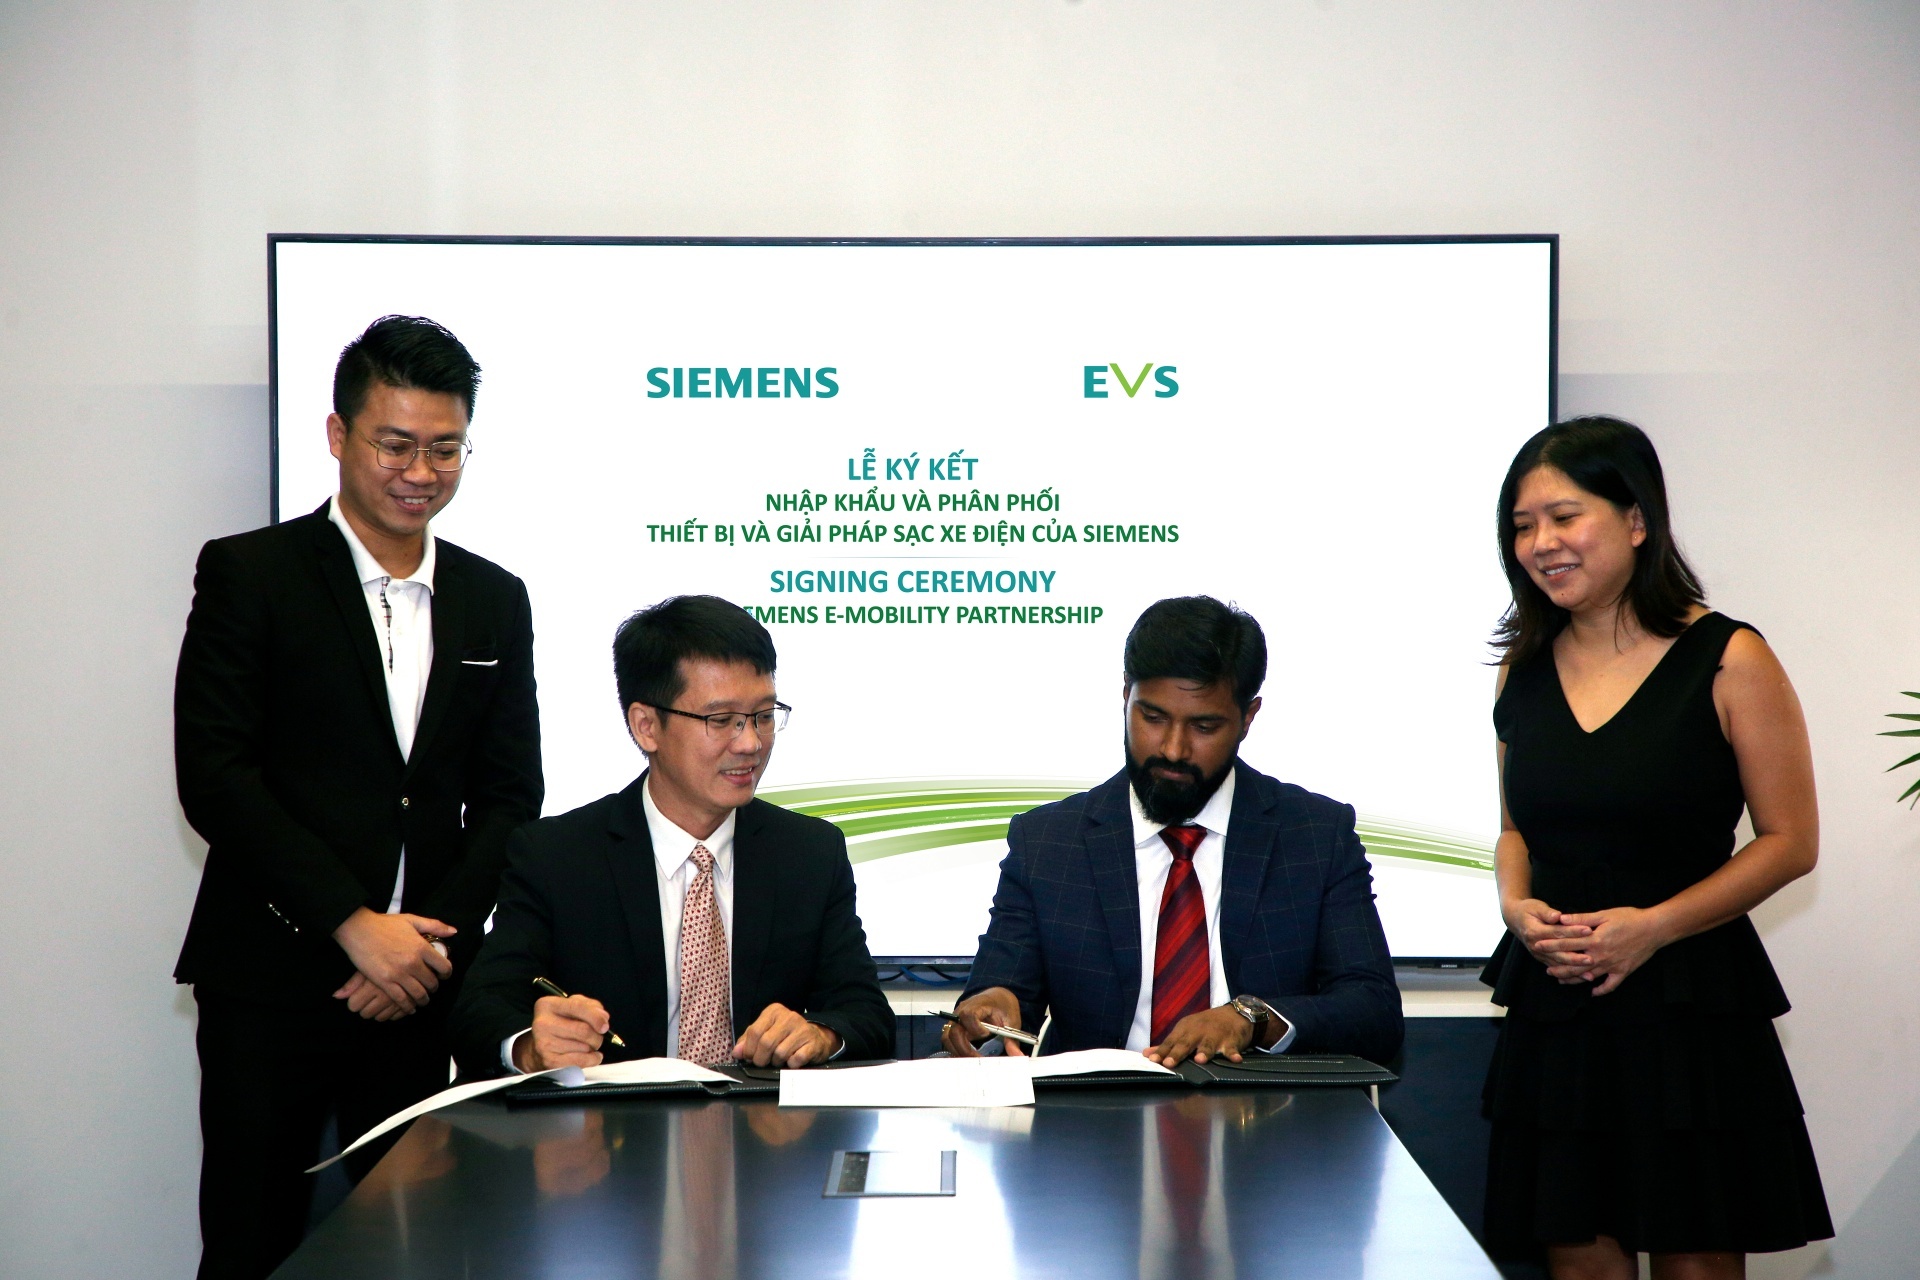 EVS signs partnership with Siemens e-Mobility in Vietnam